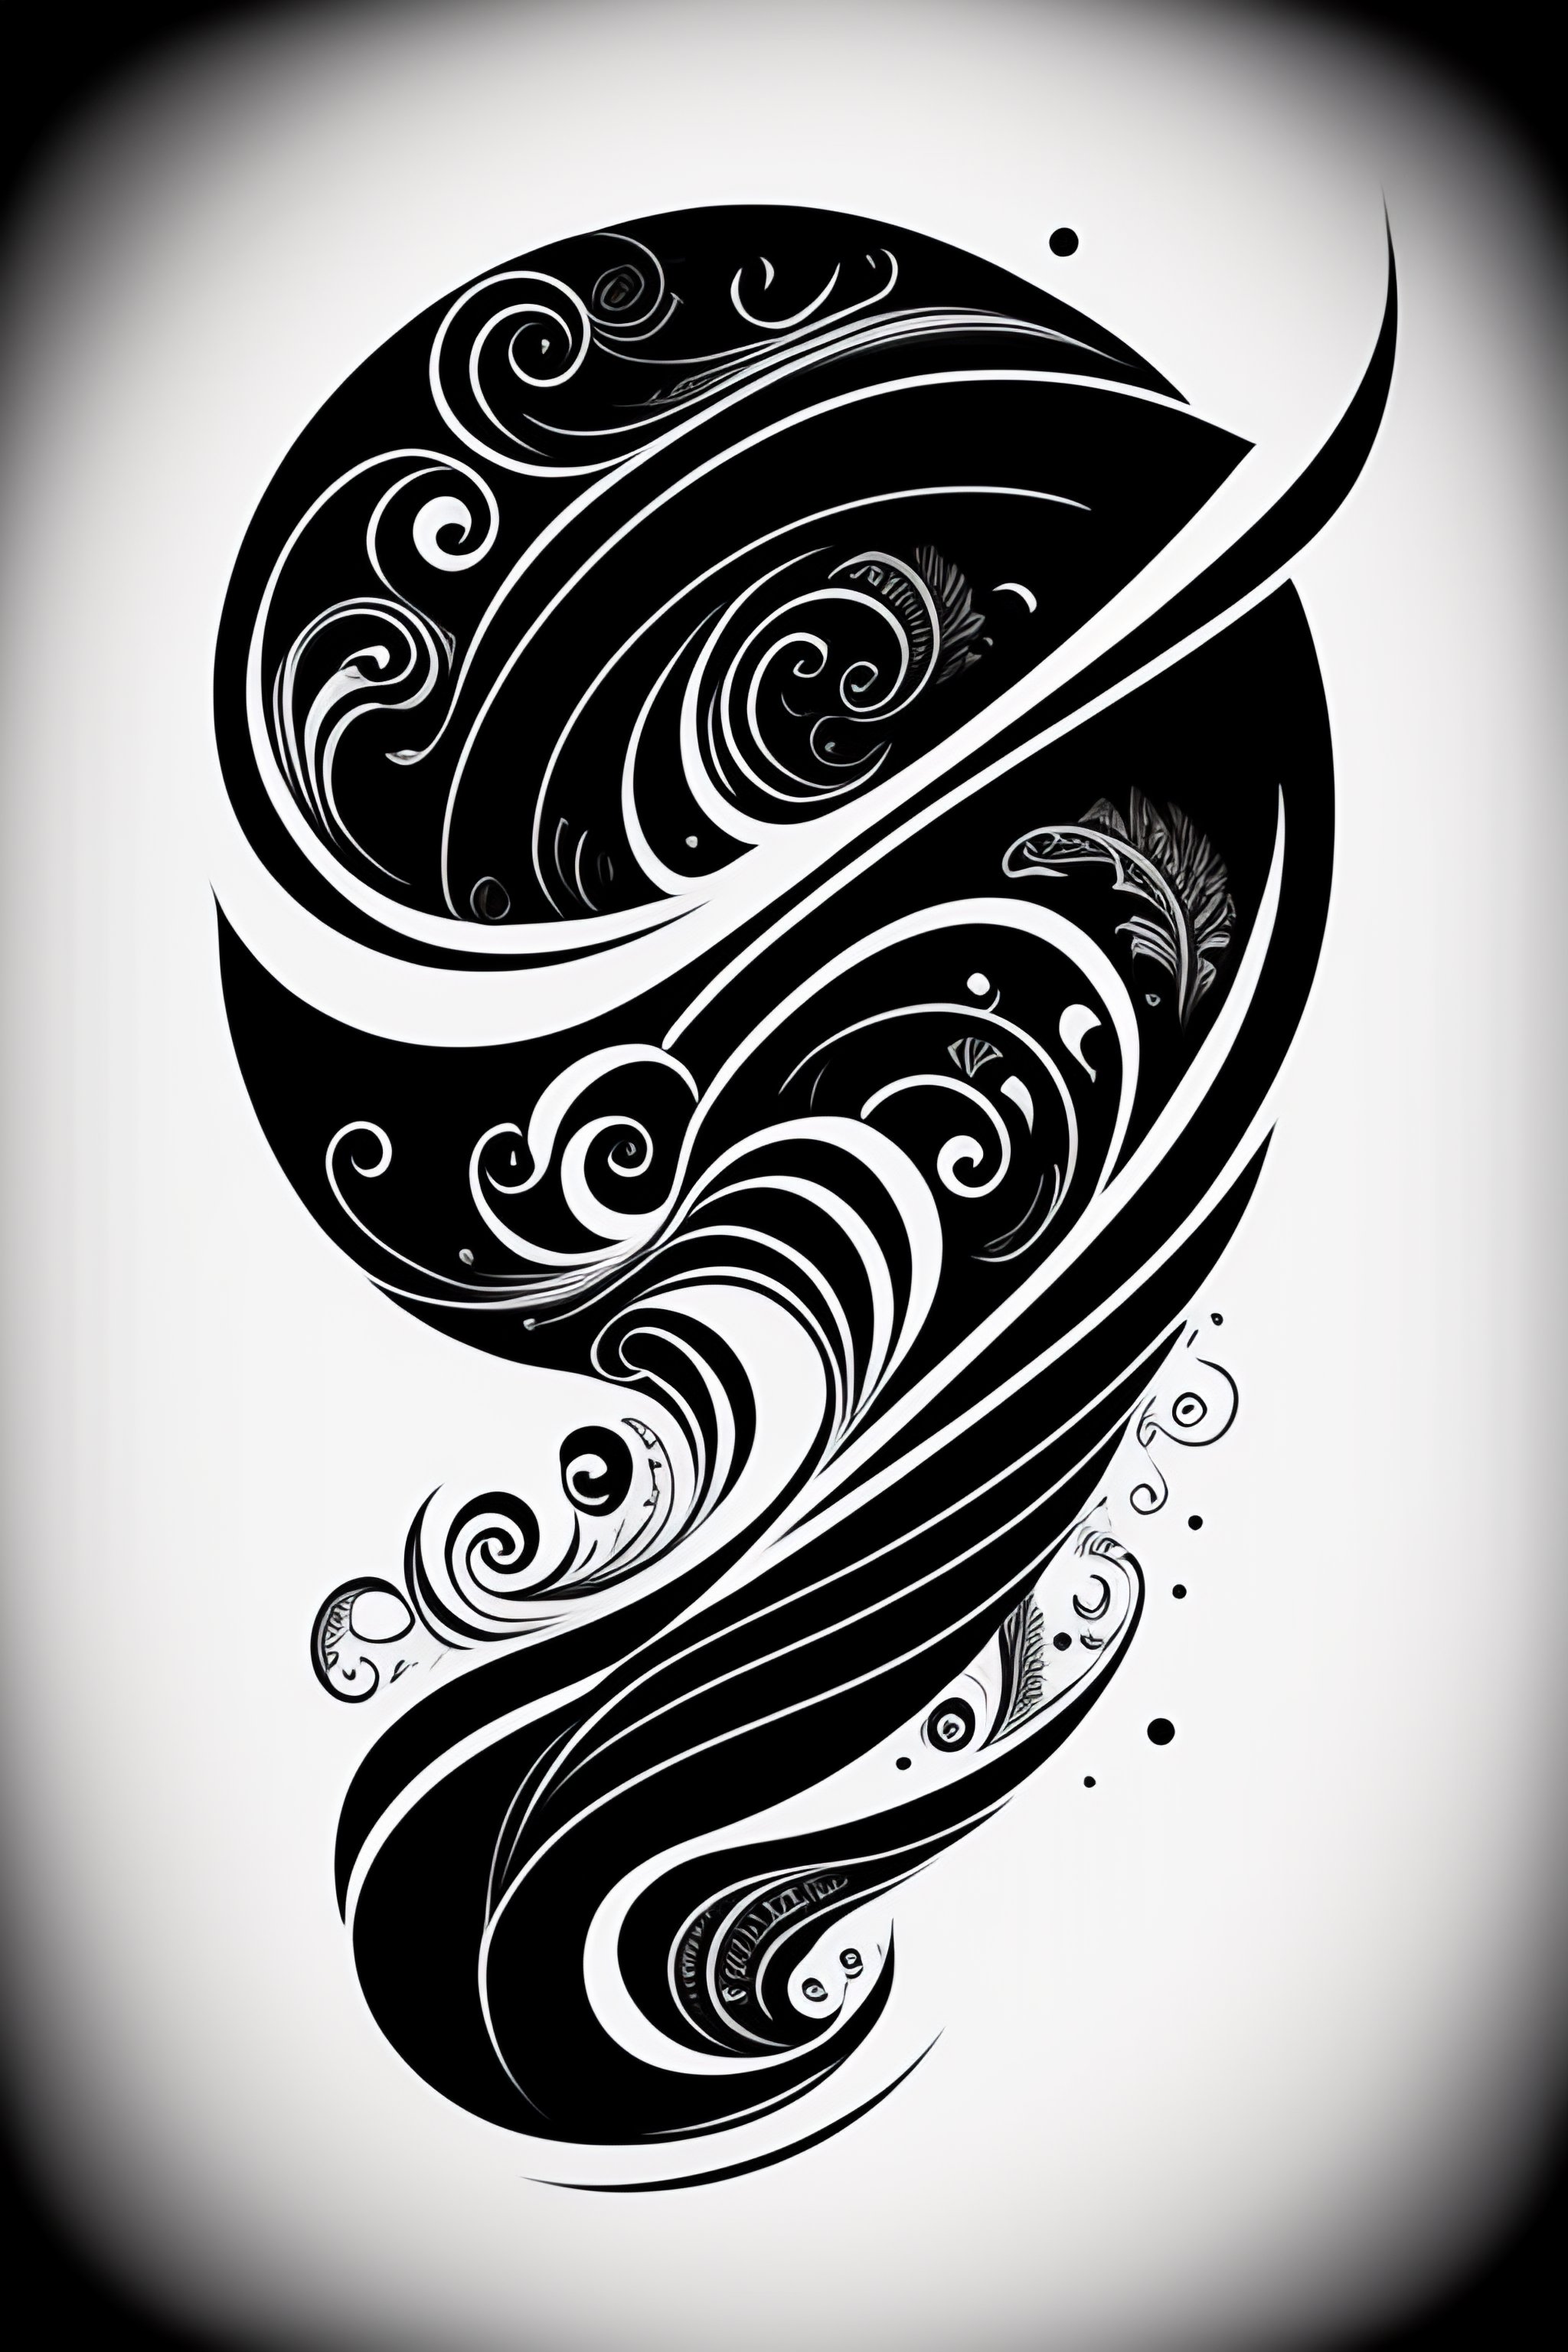 Lexica - Tattoo design,wall art, simple design on white background, clean black pen drawing